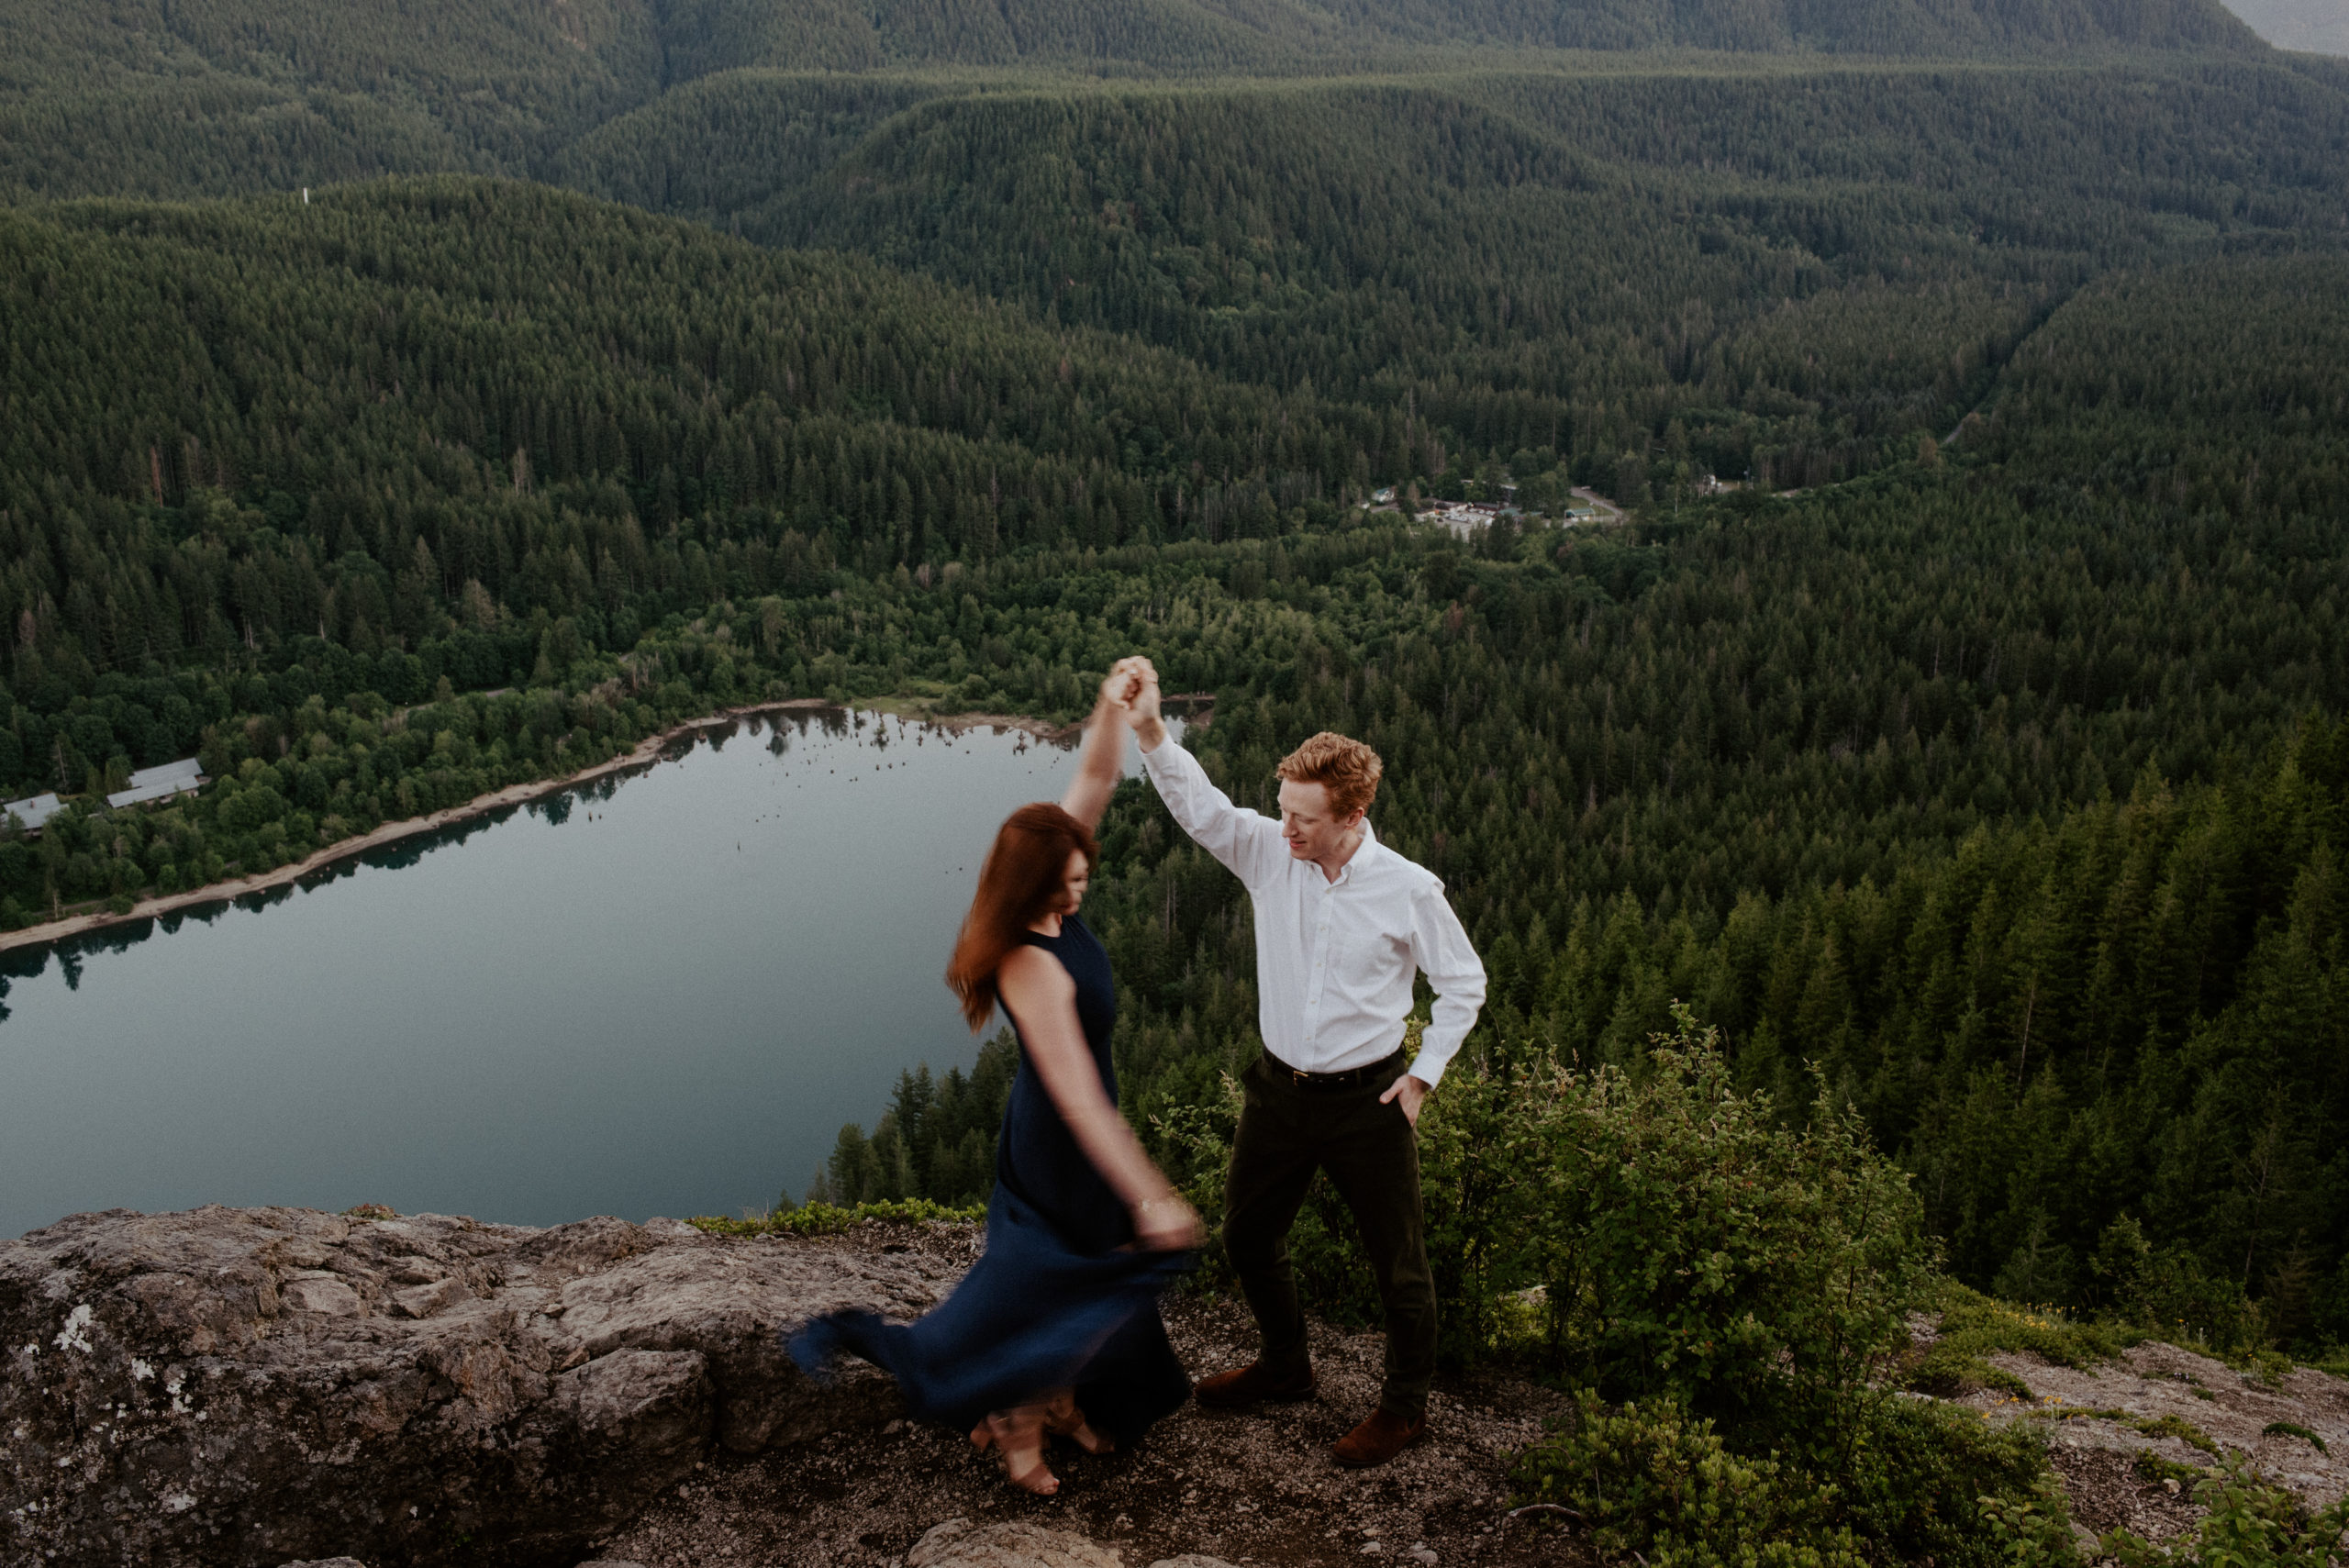 A couple dances on a mountaintop, with the man in a white shirt and the woman in a navy dress, surrounded by a stunning view of the forest and a lake below, capturing a romantic and adventurous moment.